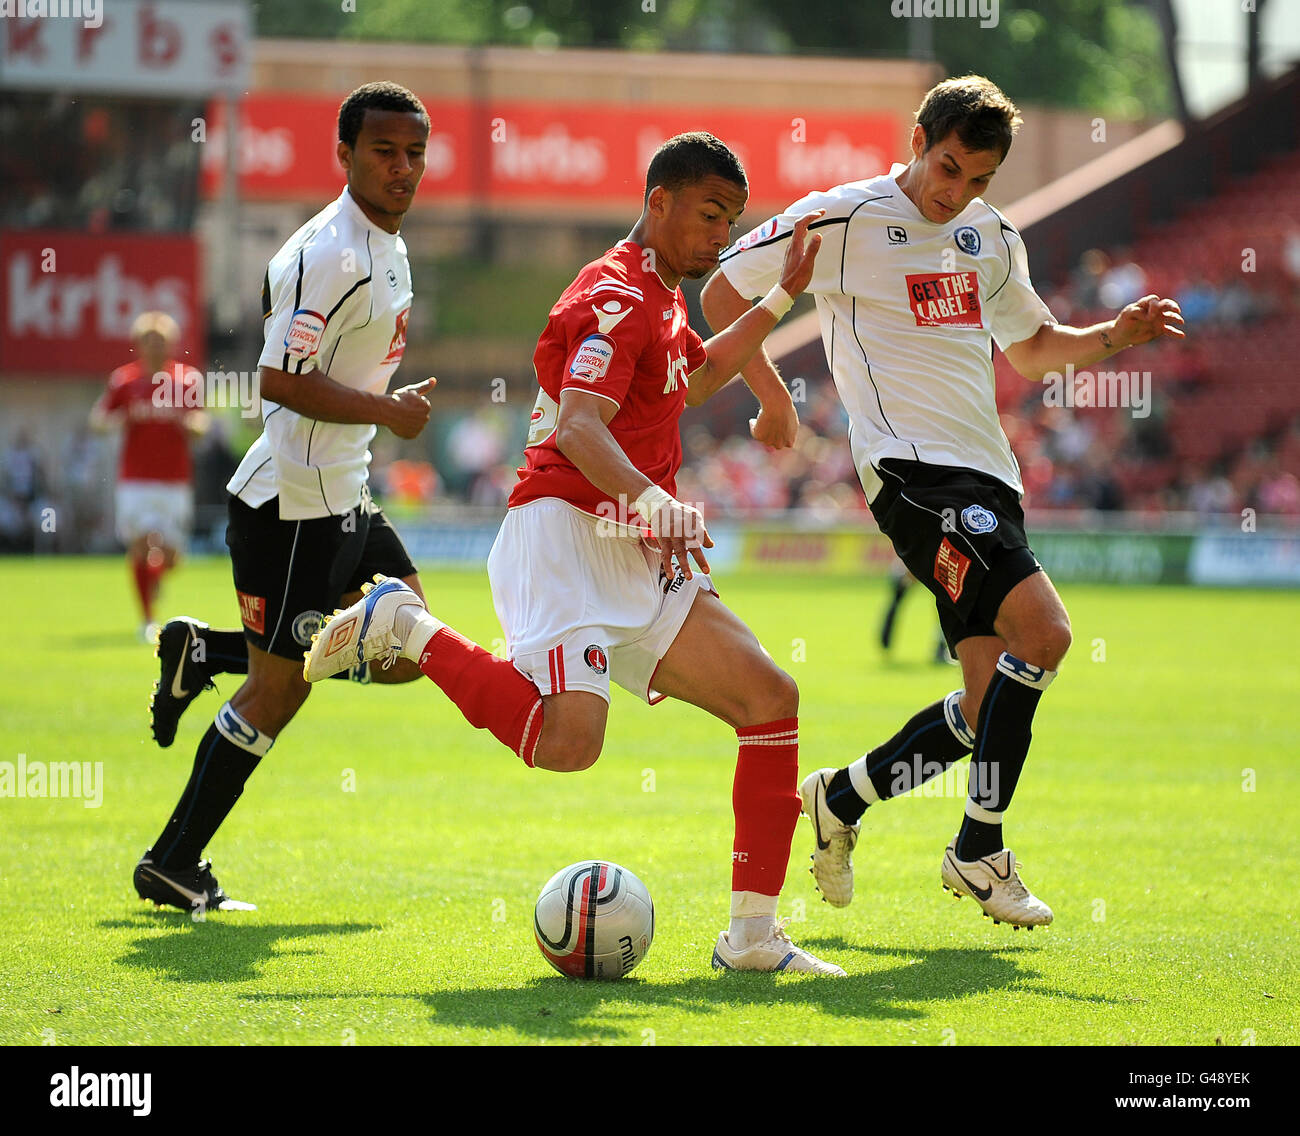 Charlton's Nathan Eccleston attacks the Rochdale goal during the npower football league One match at The Valley, London. Stock Photo